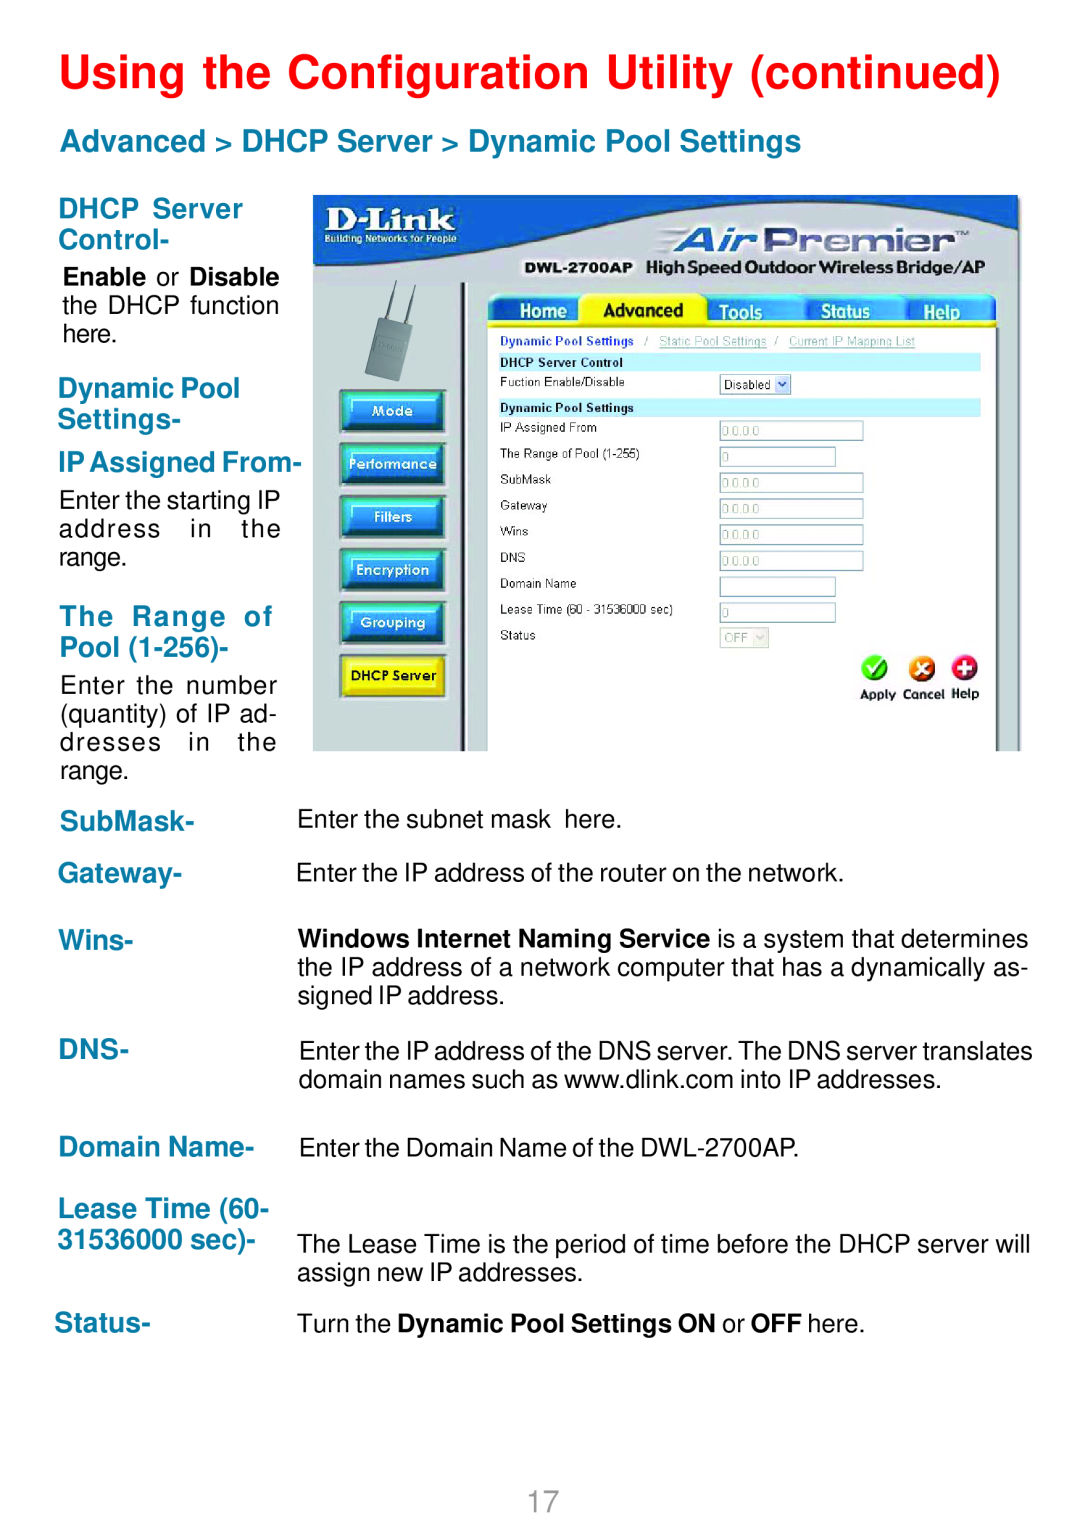 D-Link DWL-2700AP Advanced DHCP Server Dynamic Pool Settings, DHCP Server Control, Dynamic Pool Settings IP Assigned From 